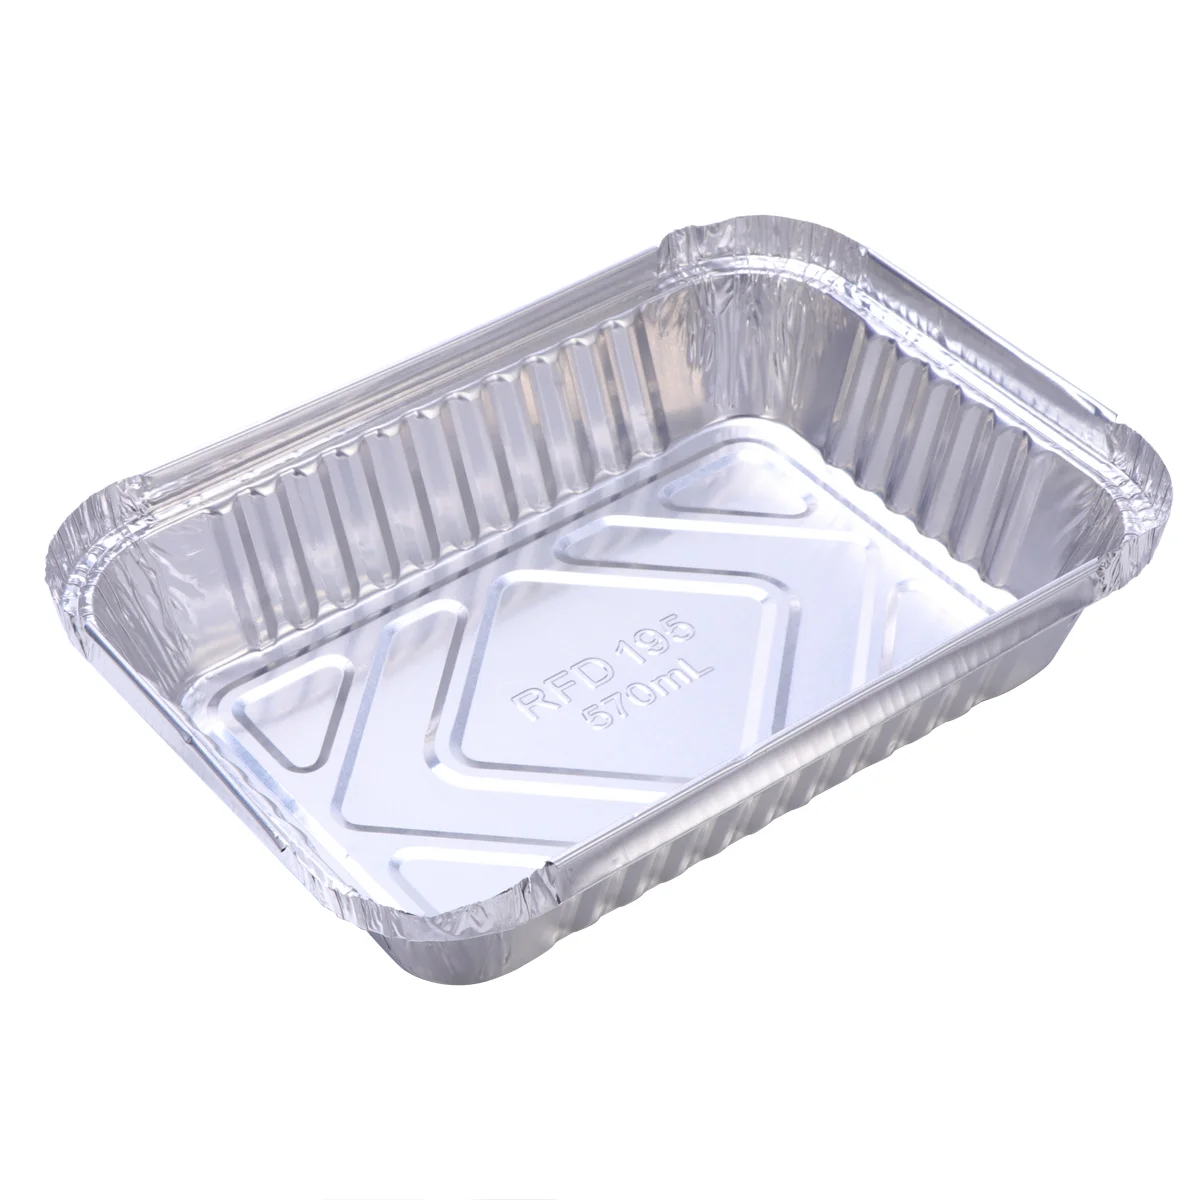 

Disposable Pans Aluminum Bbq Drip Trays Pan Grease Tray Tins Tin Case Box Packing Takeaway Baking Barbecue Catchlasagna Broiler